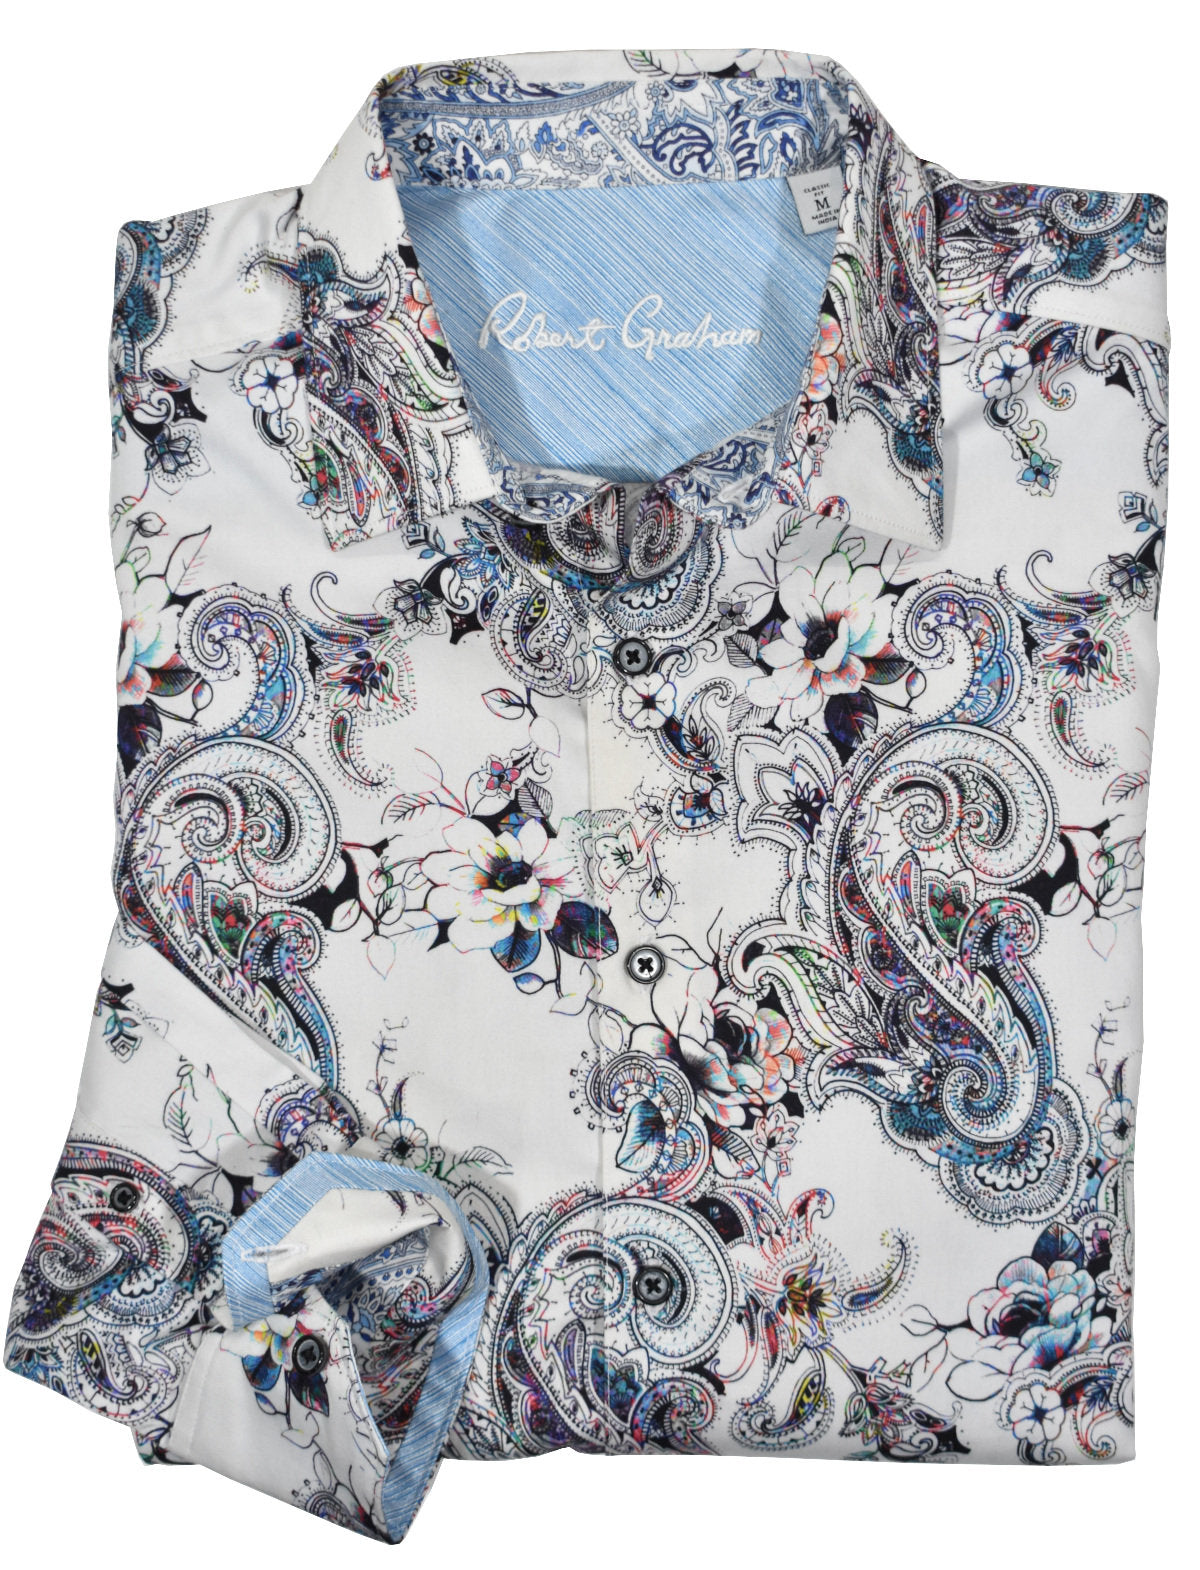 Robert Graham ornate paisleys on soft cotton sateen with stretch for comfort and unique Graham detailing.   The warm colors with a touch of teal creates a fashion look that is not too bold.